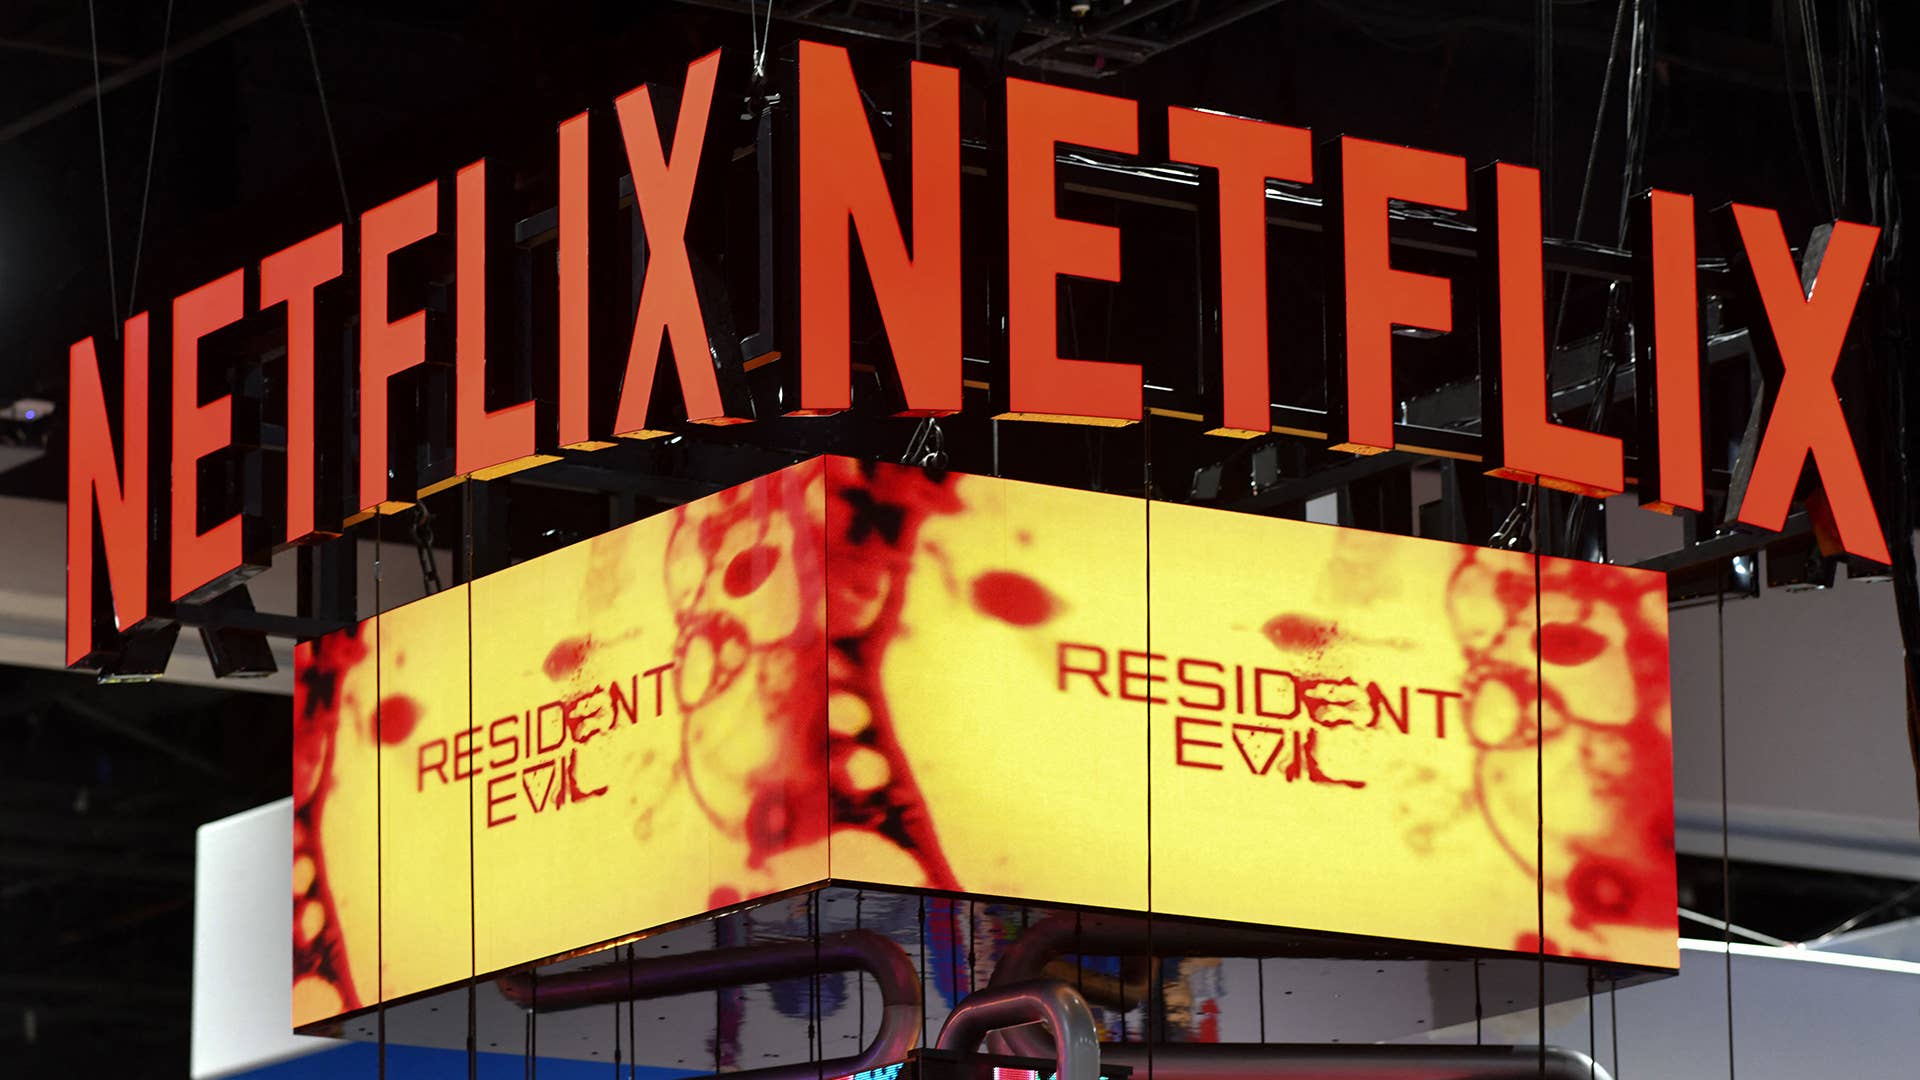 The Netflix booth advertises the "Resident Evil" series on a screen during Comic-Con International in San Diego